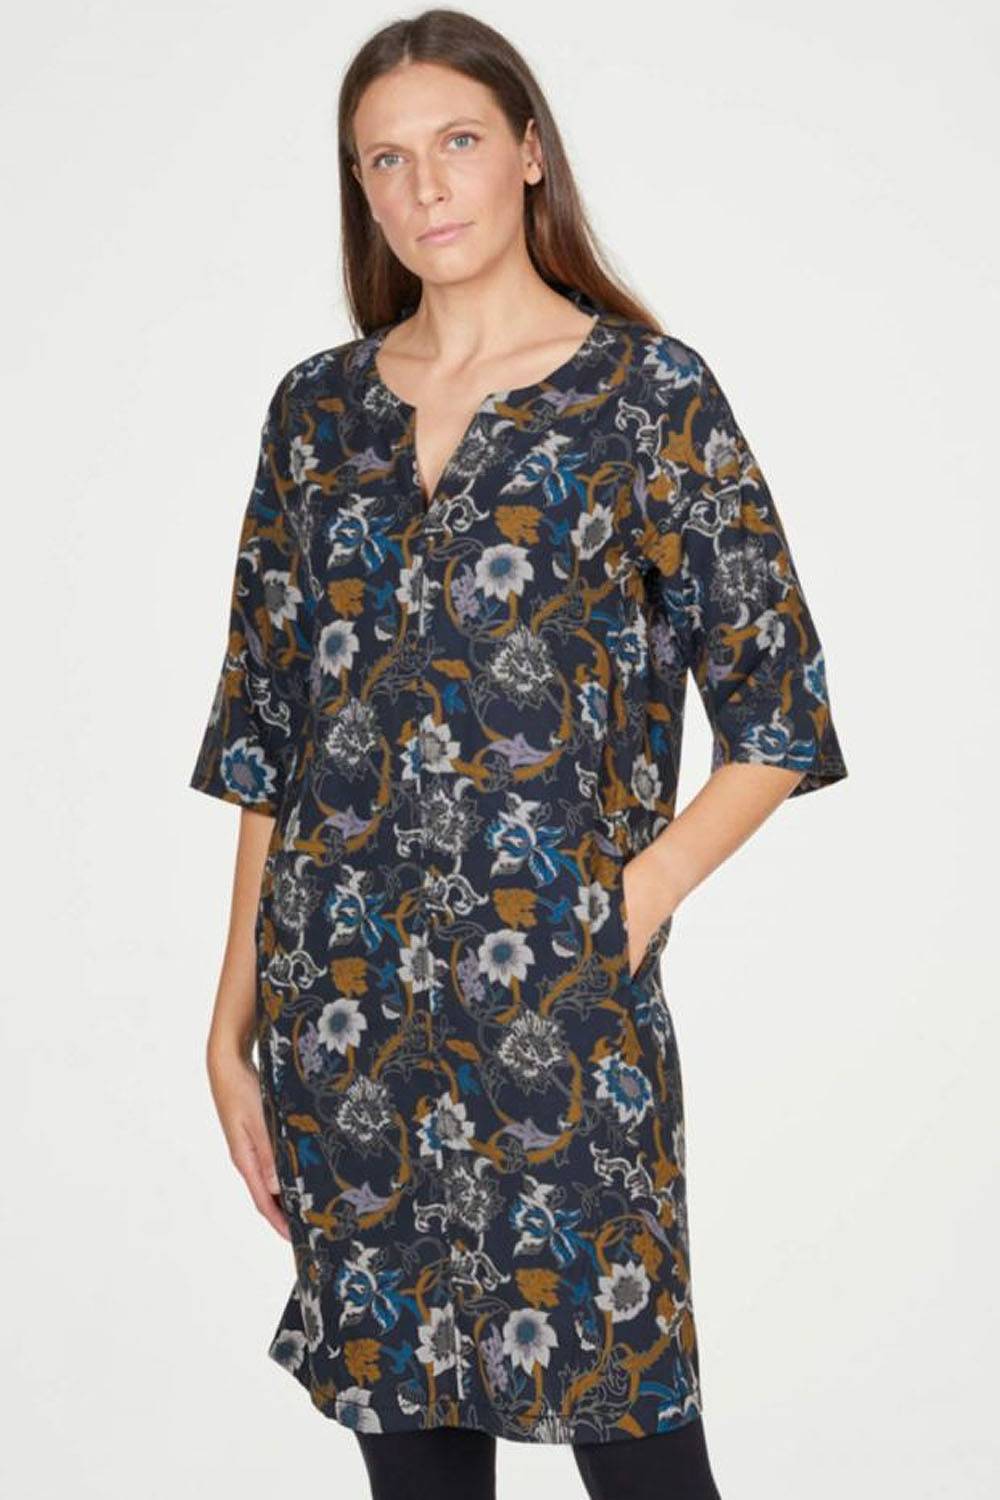 12 Best Affordable, Ethical, And Organic Cotton Kaftans | Panaprium